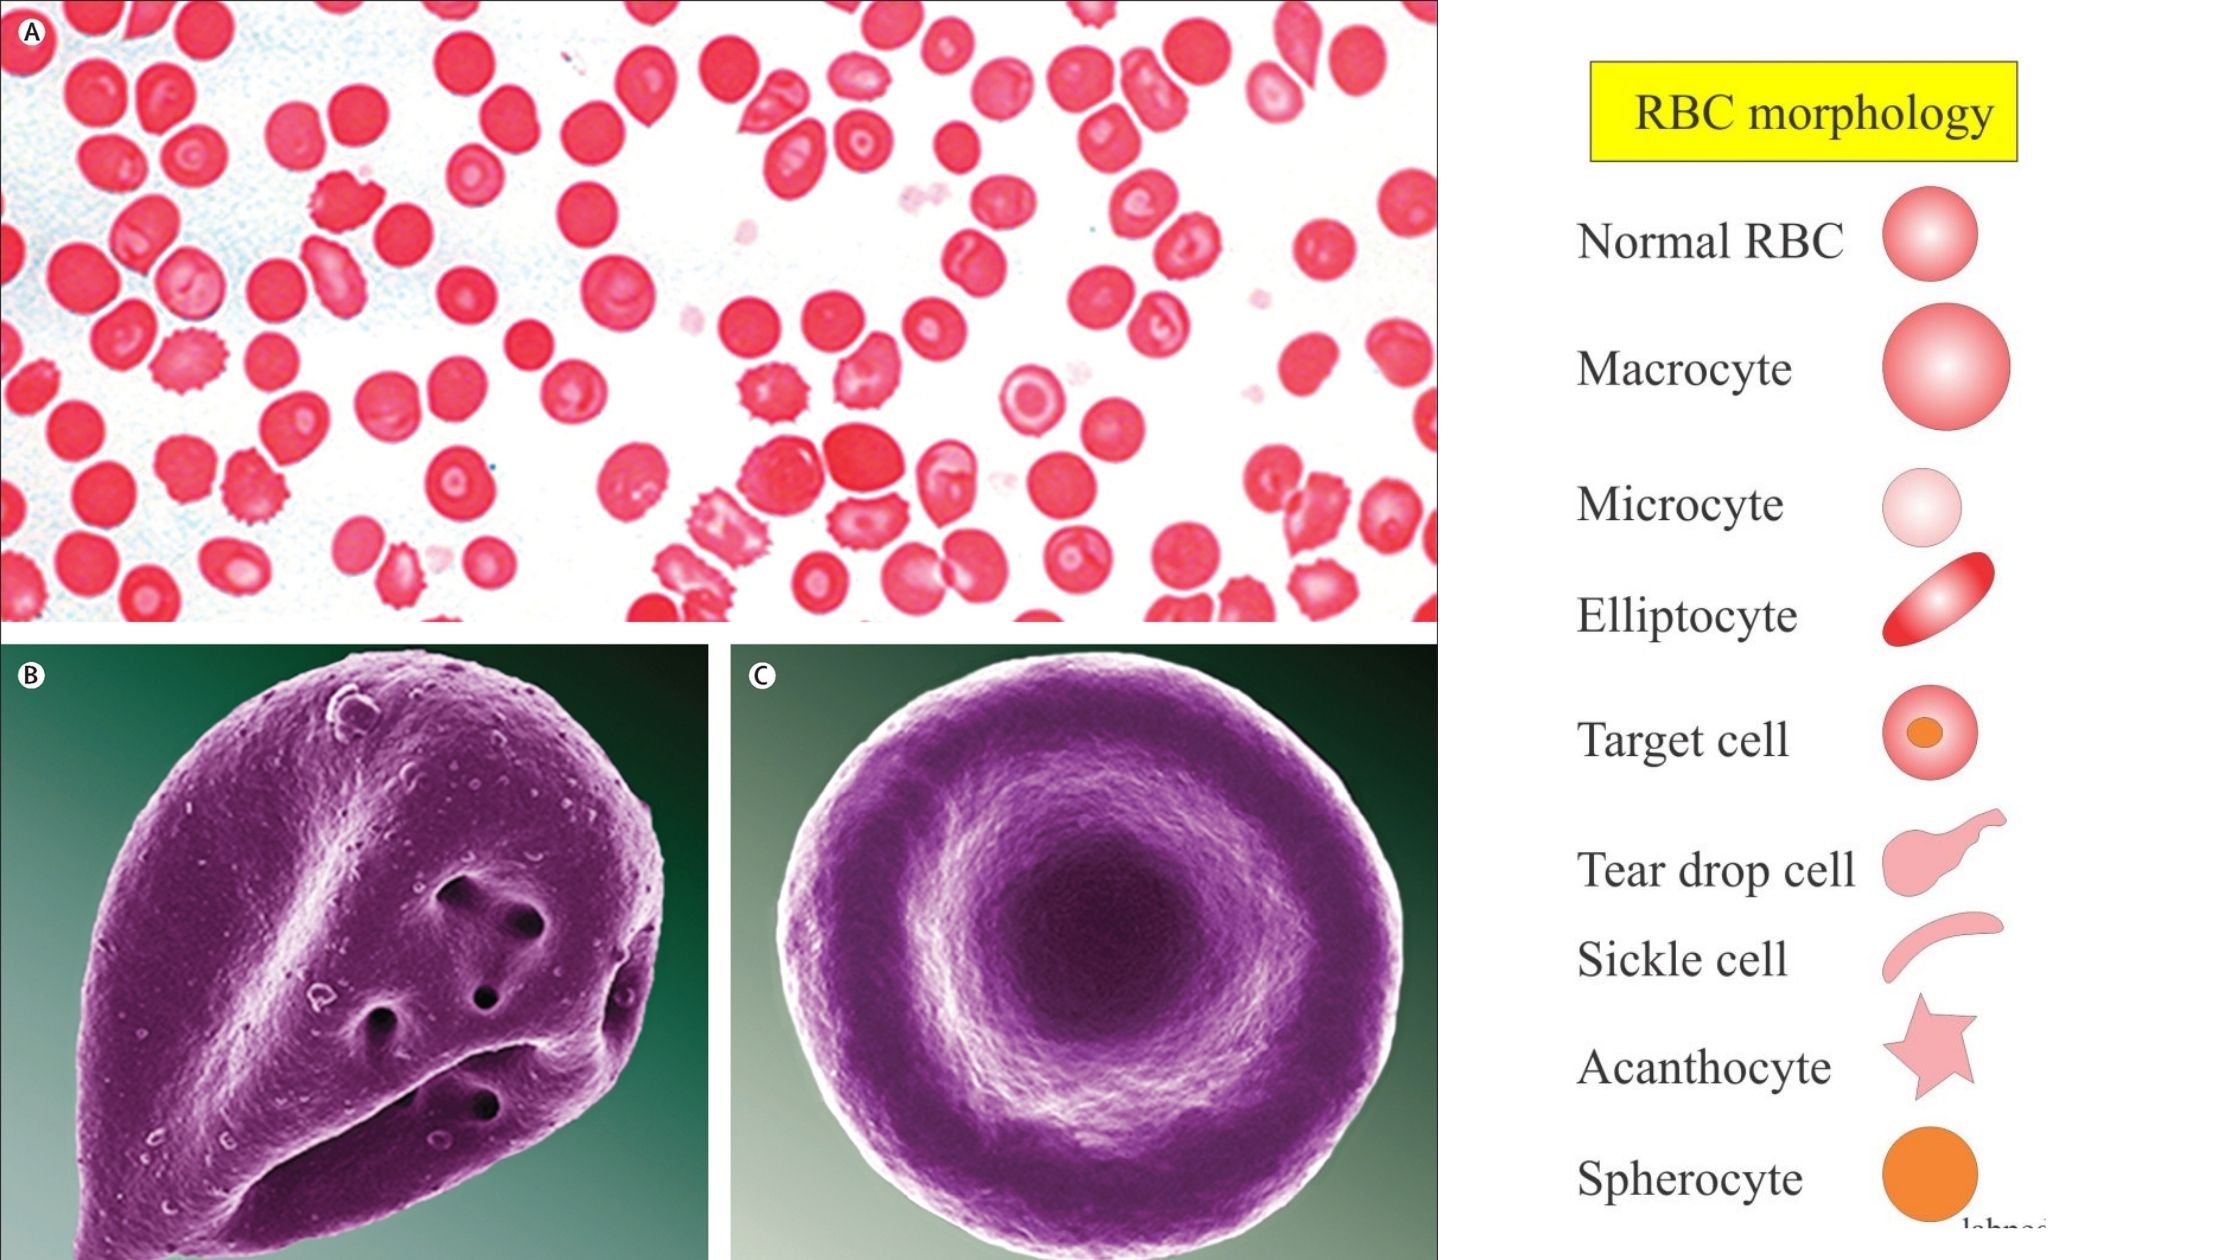 Red Blood Cell Morphology: Size, Shape, Color and Inclusion Bodies